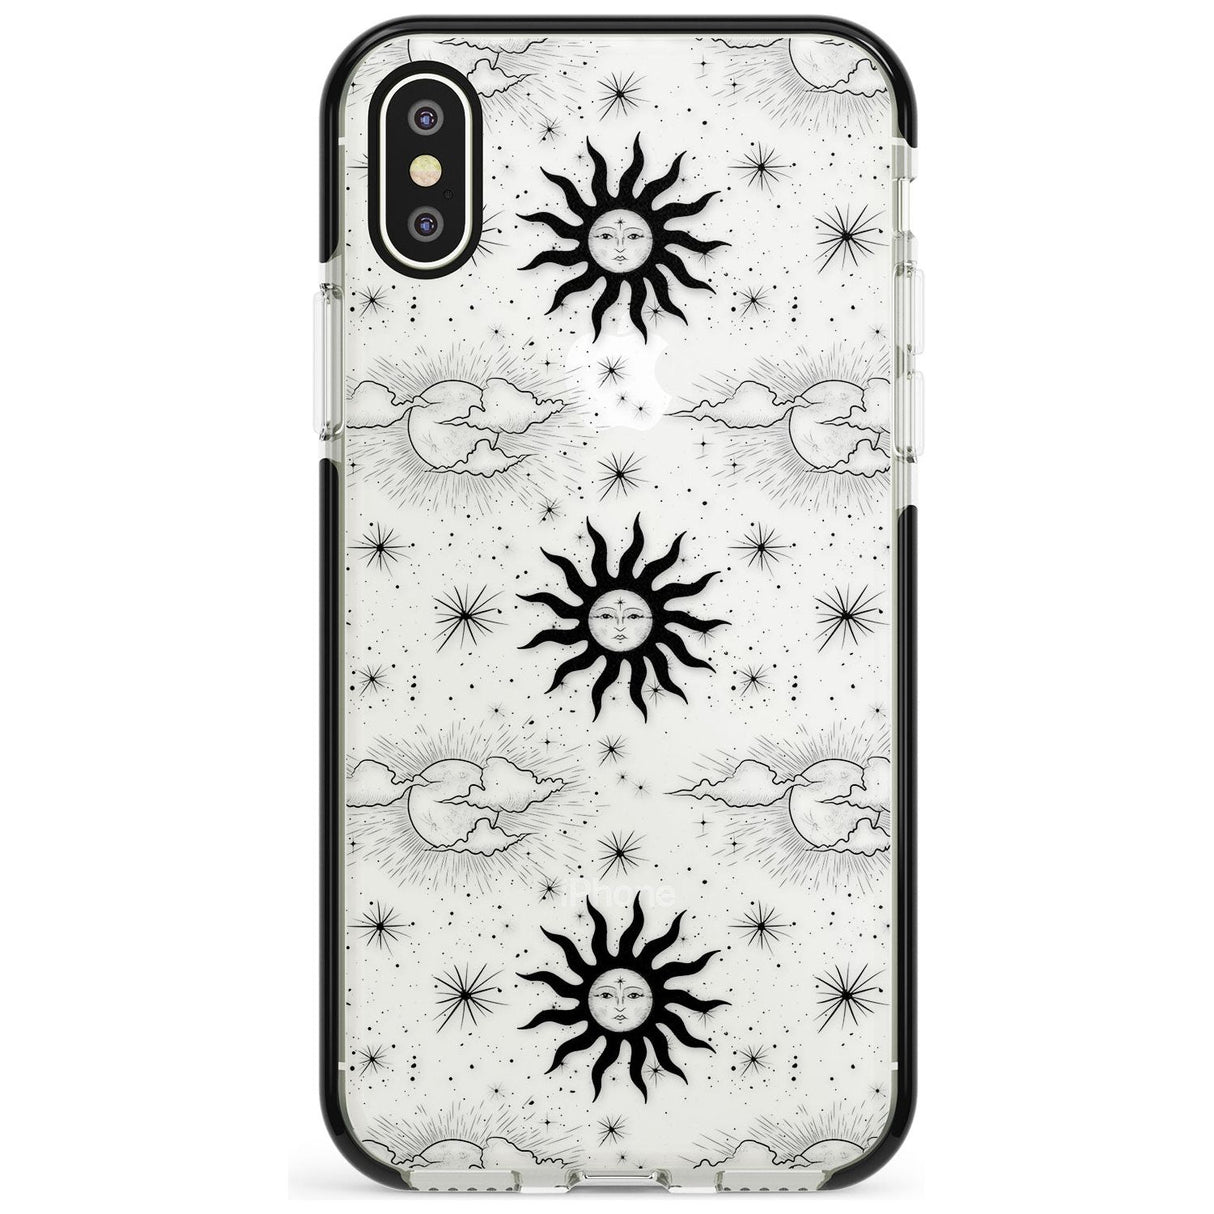 Suns & Clouds Vintage Astrological Black Impact Phone Case for iPhone X XS Max XR